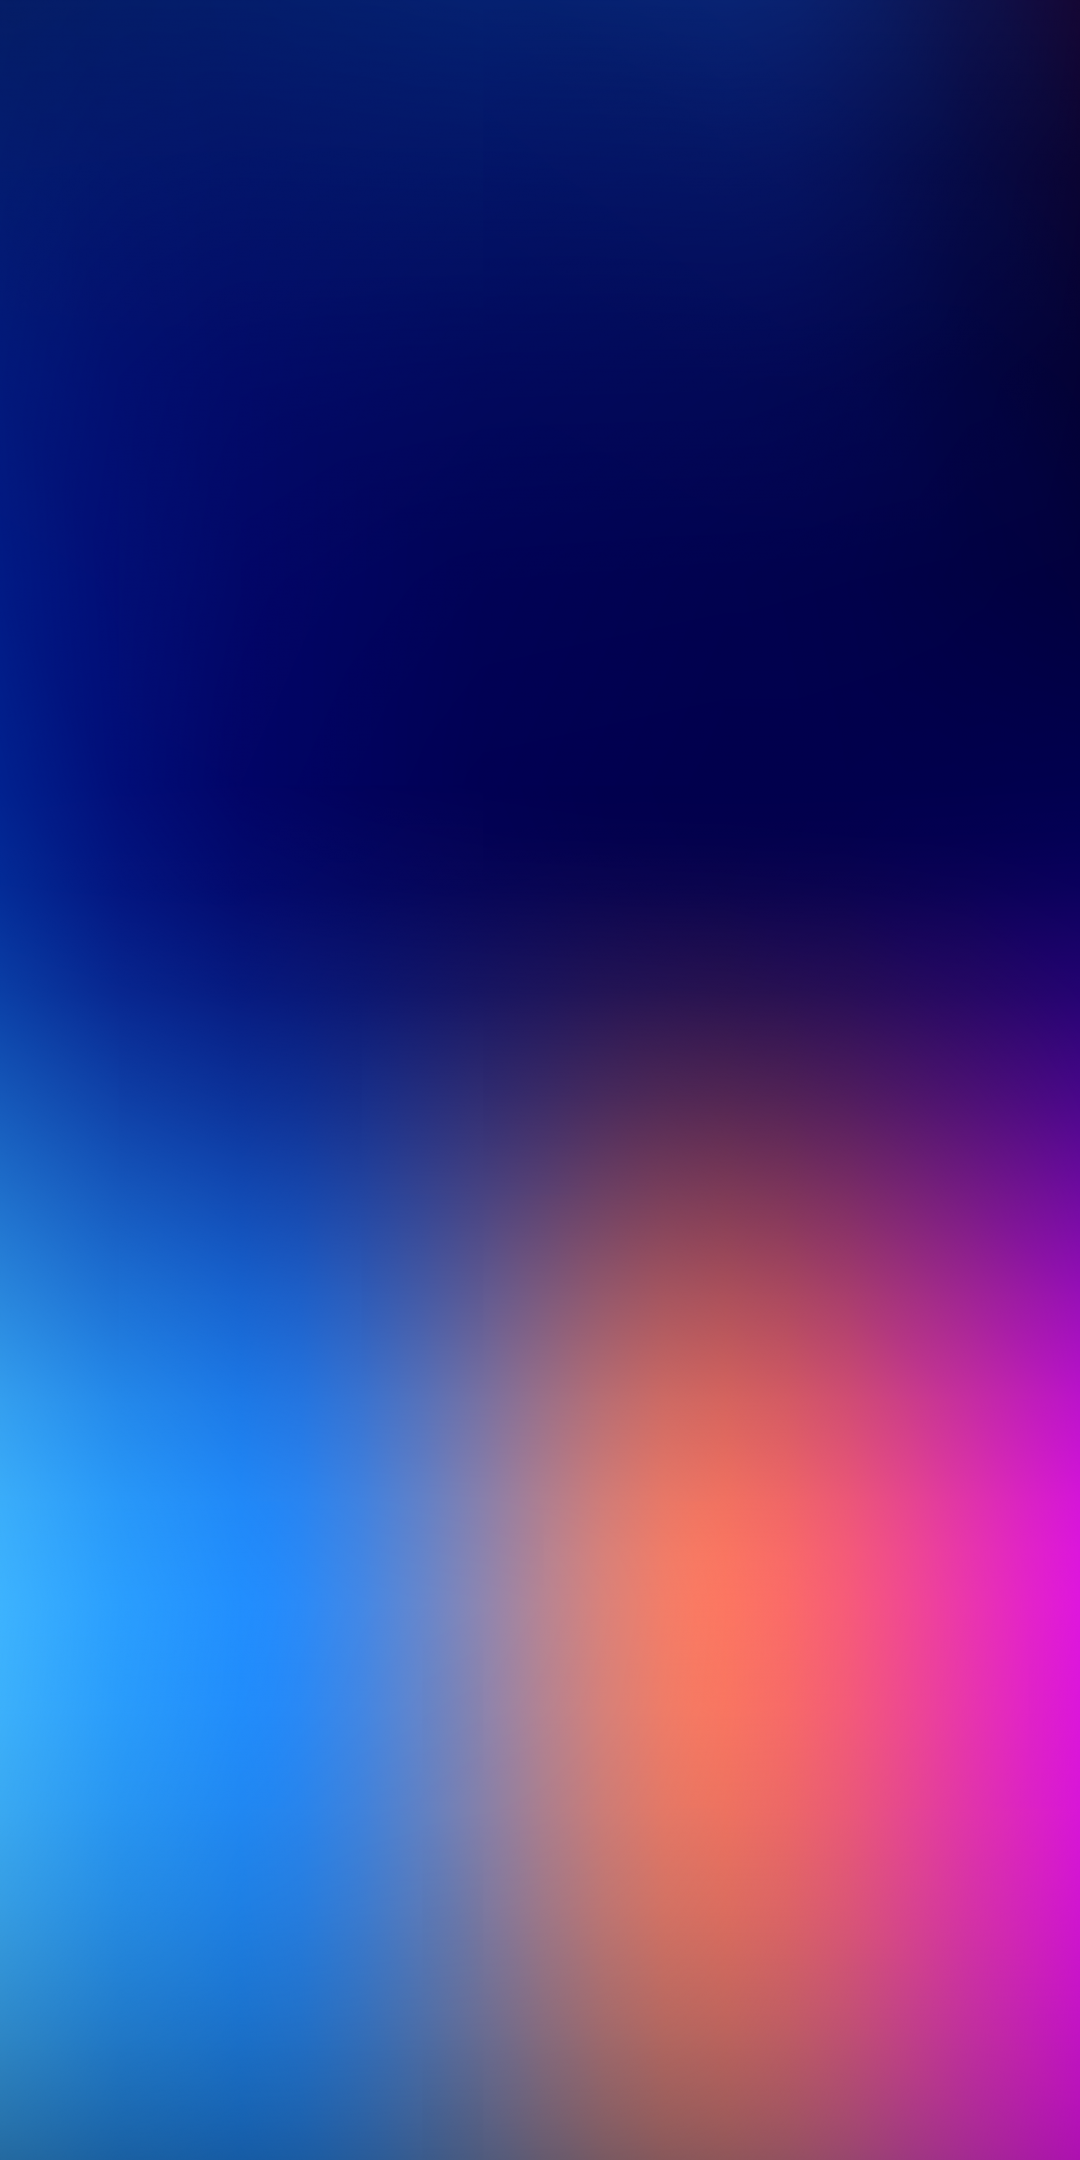 iOS 15 Beta 5 – The smooth and soothing gradient by Ongliong11 | Zollotech